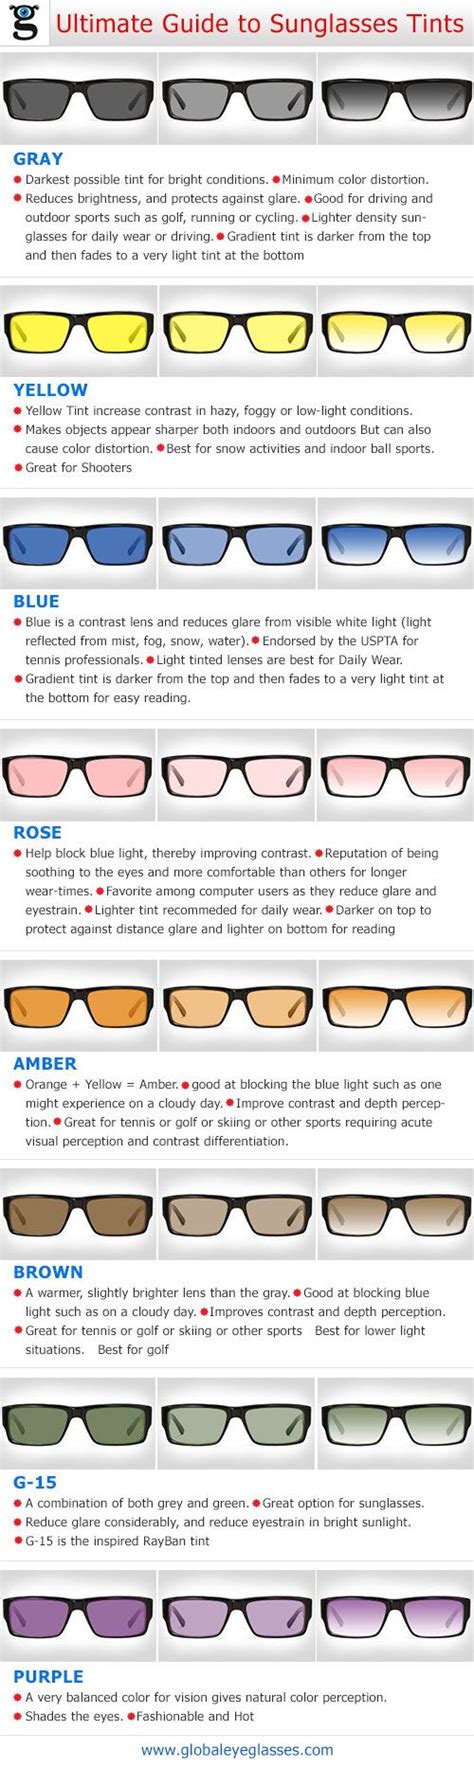 Can Alcohol Remove The Tint From Sunglasses